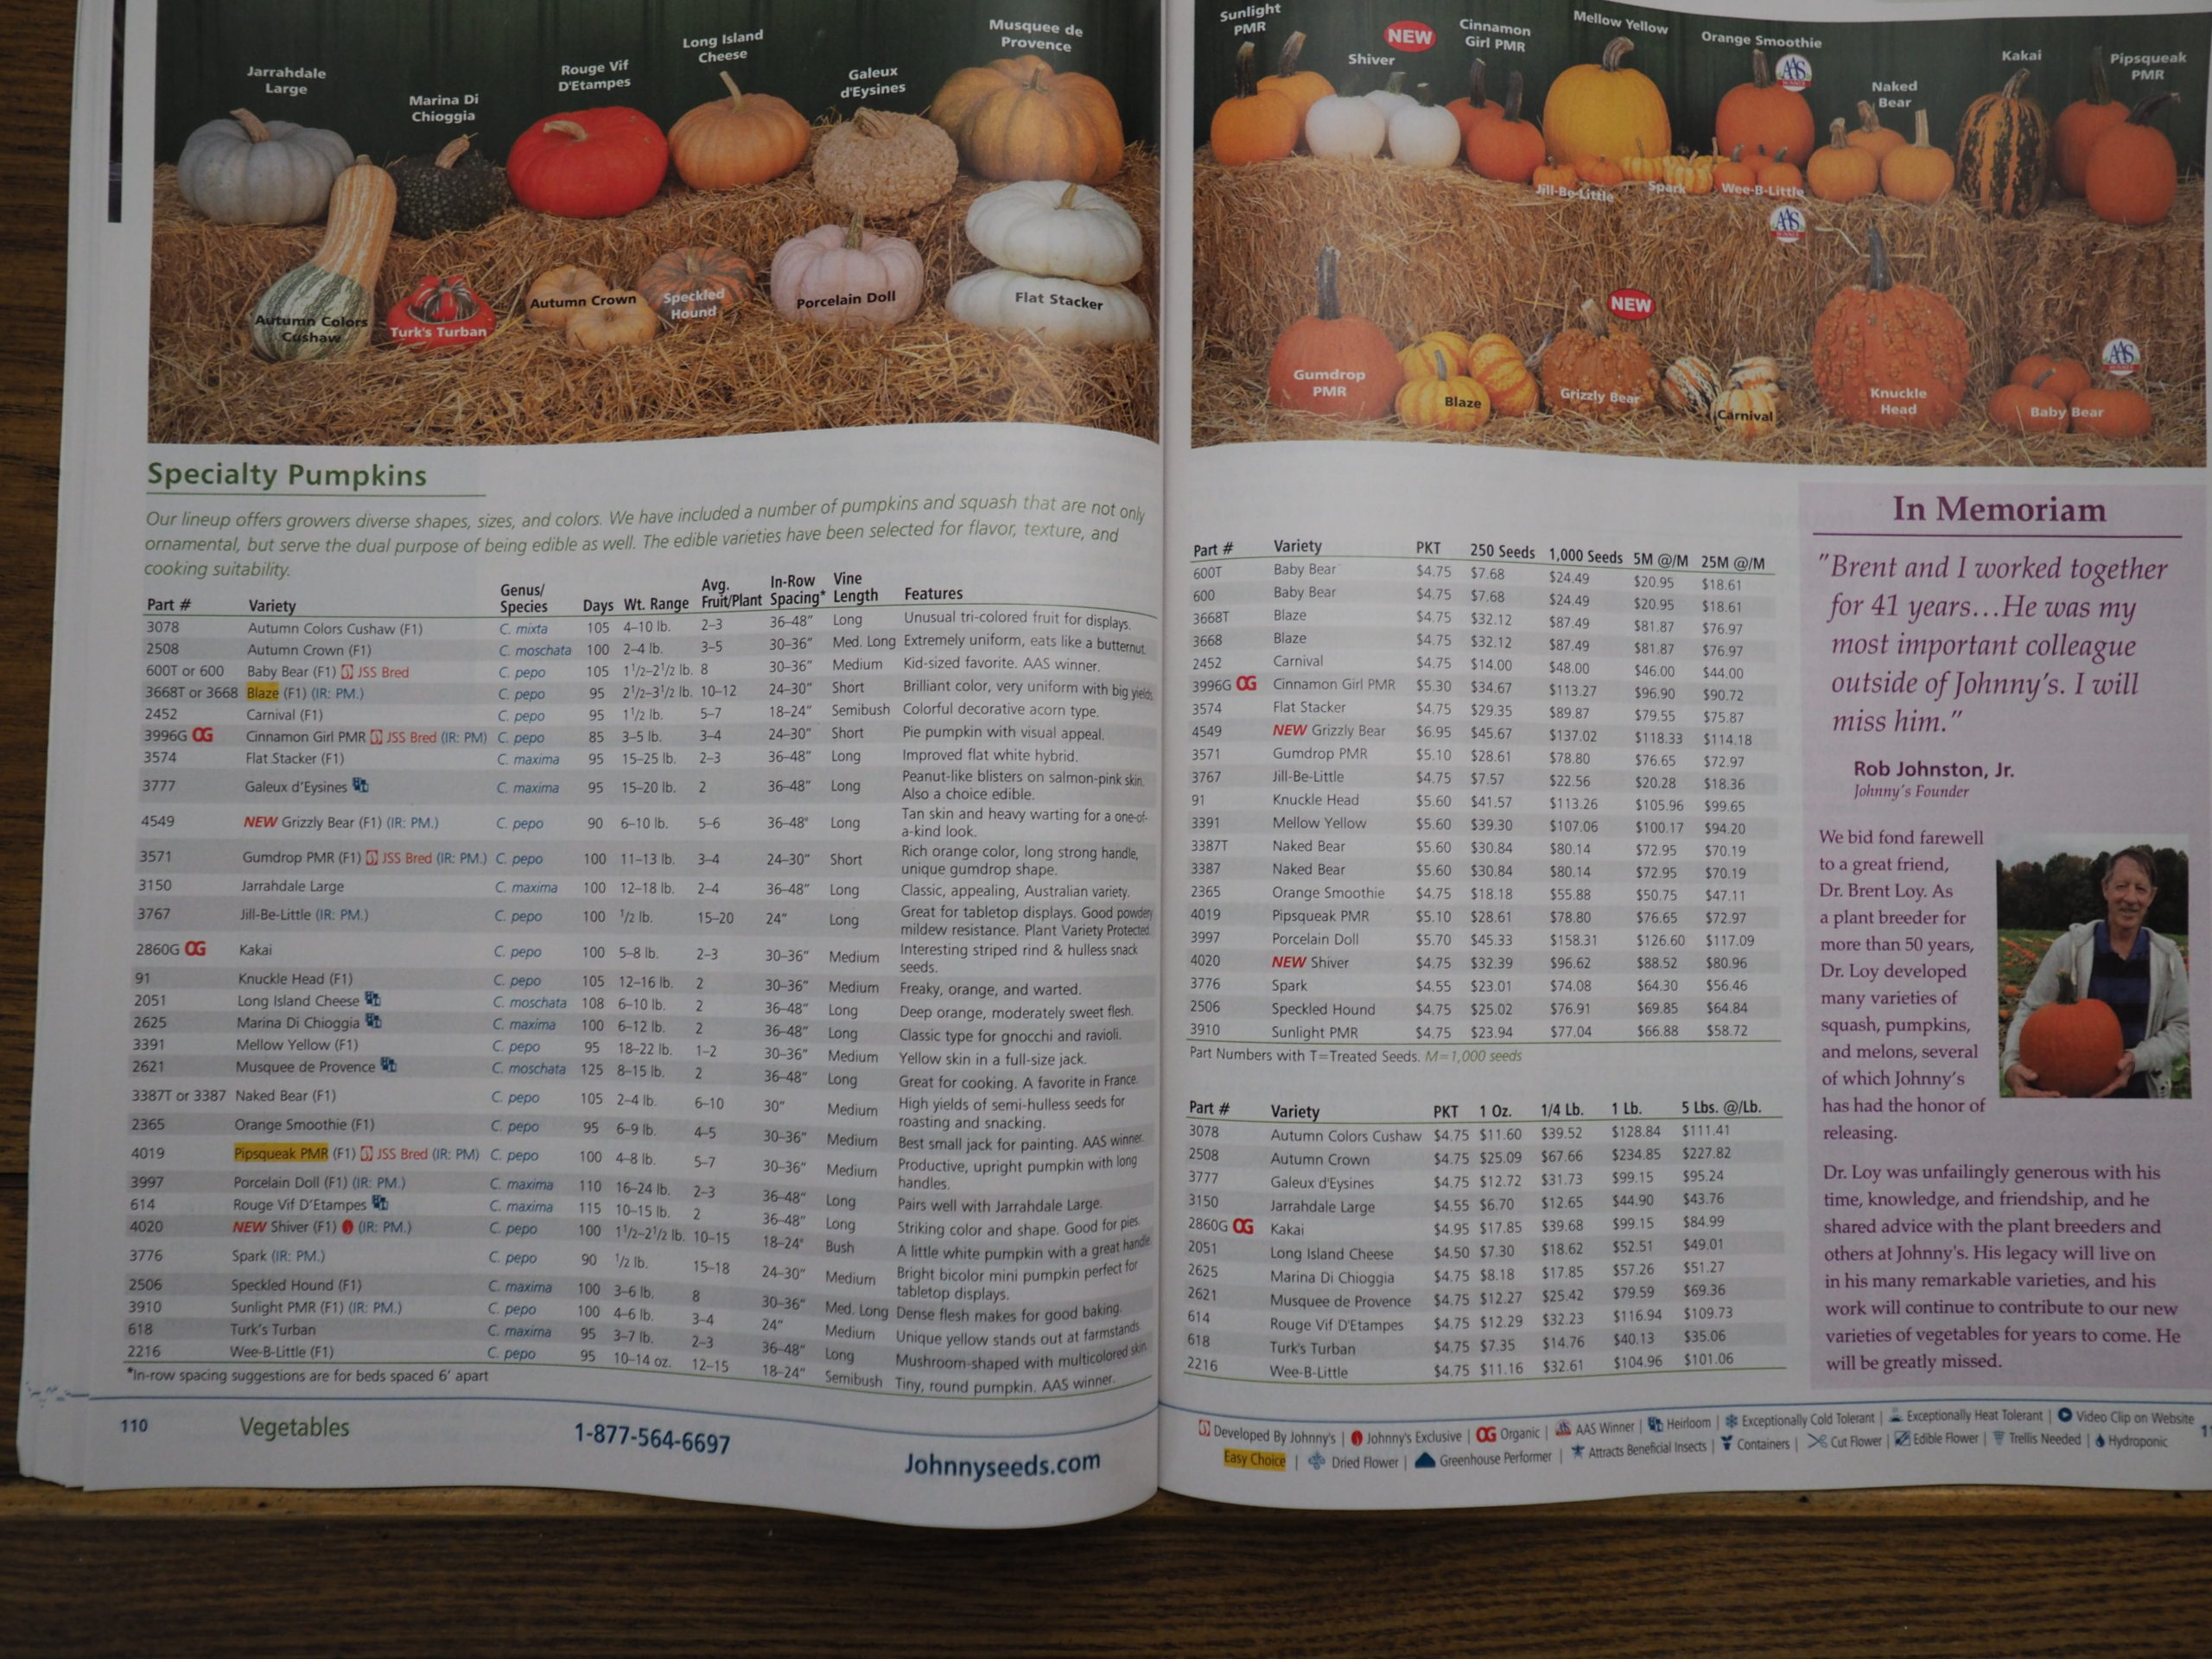 Johnny’s Selected Seeds offers scores of choices when it comes to pumpkins.  These two pages show and describe only 30 of the more than 60 pumpkin varieties that Johnny’s includes in its 2021 catalog.